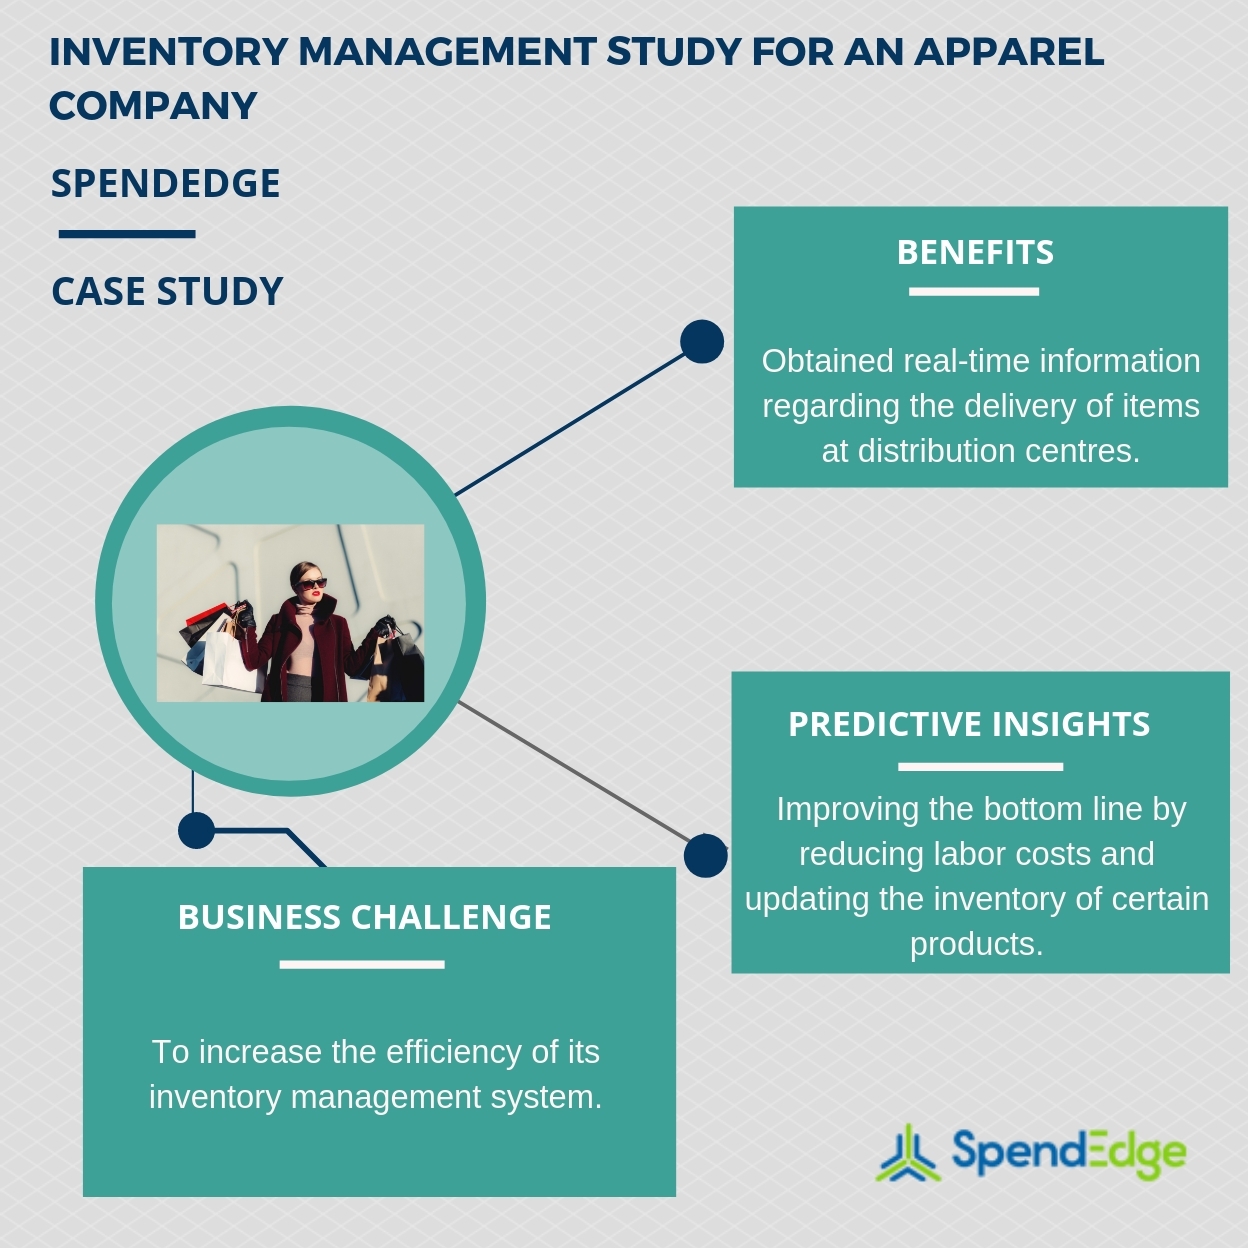 scope of inventory management system